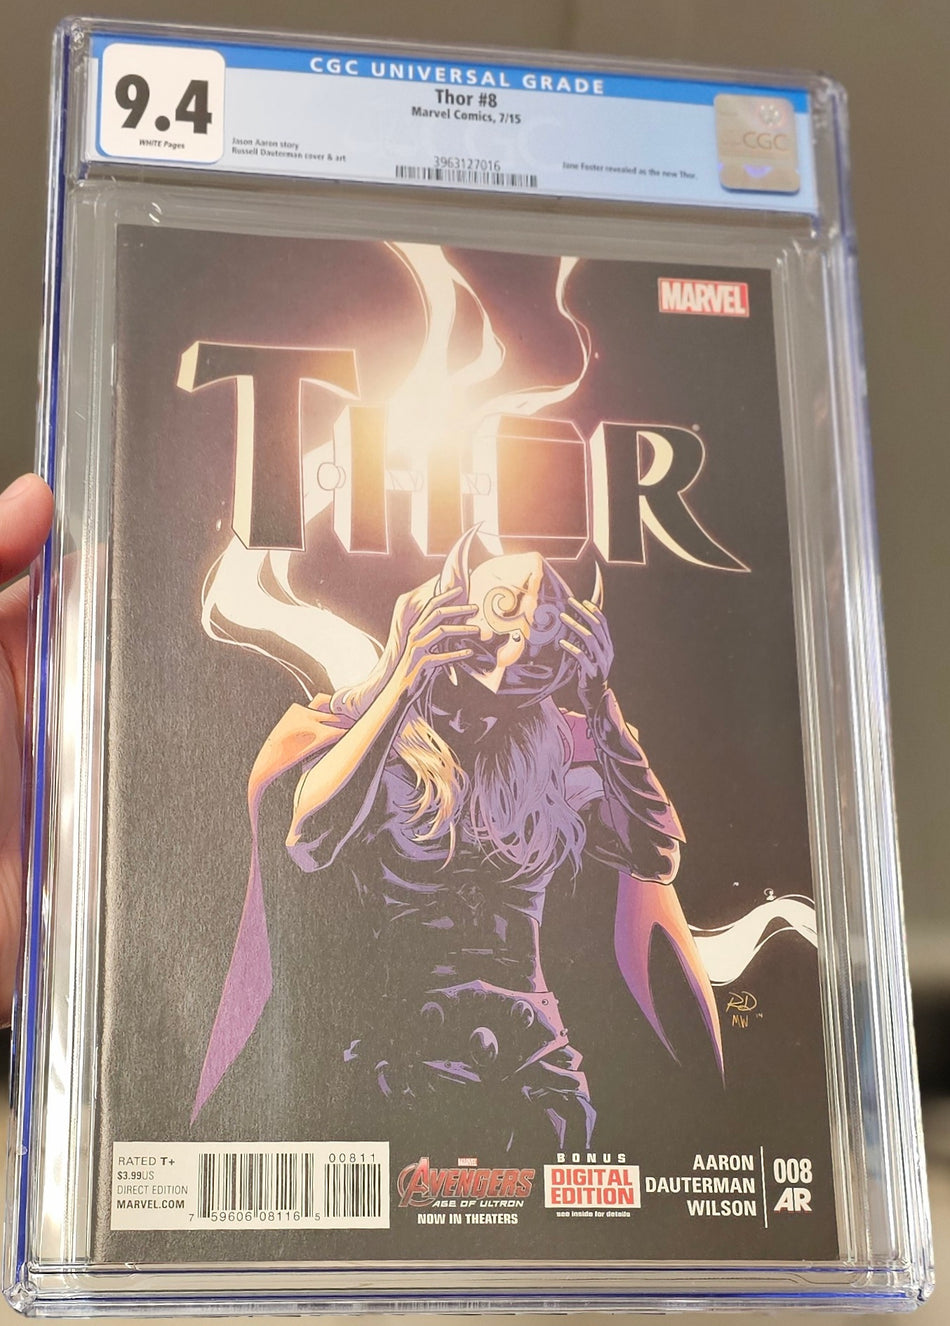 Thor #8 CGC 9.4 (Jane Foster revealed as the new Thor)